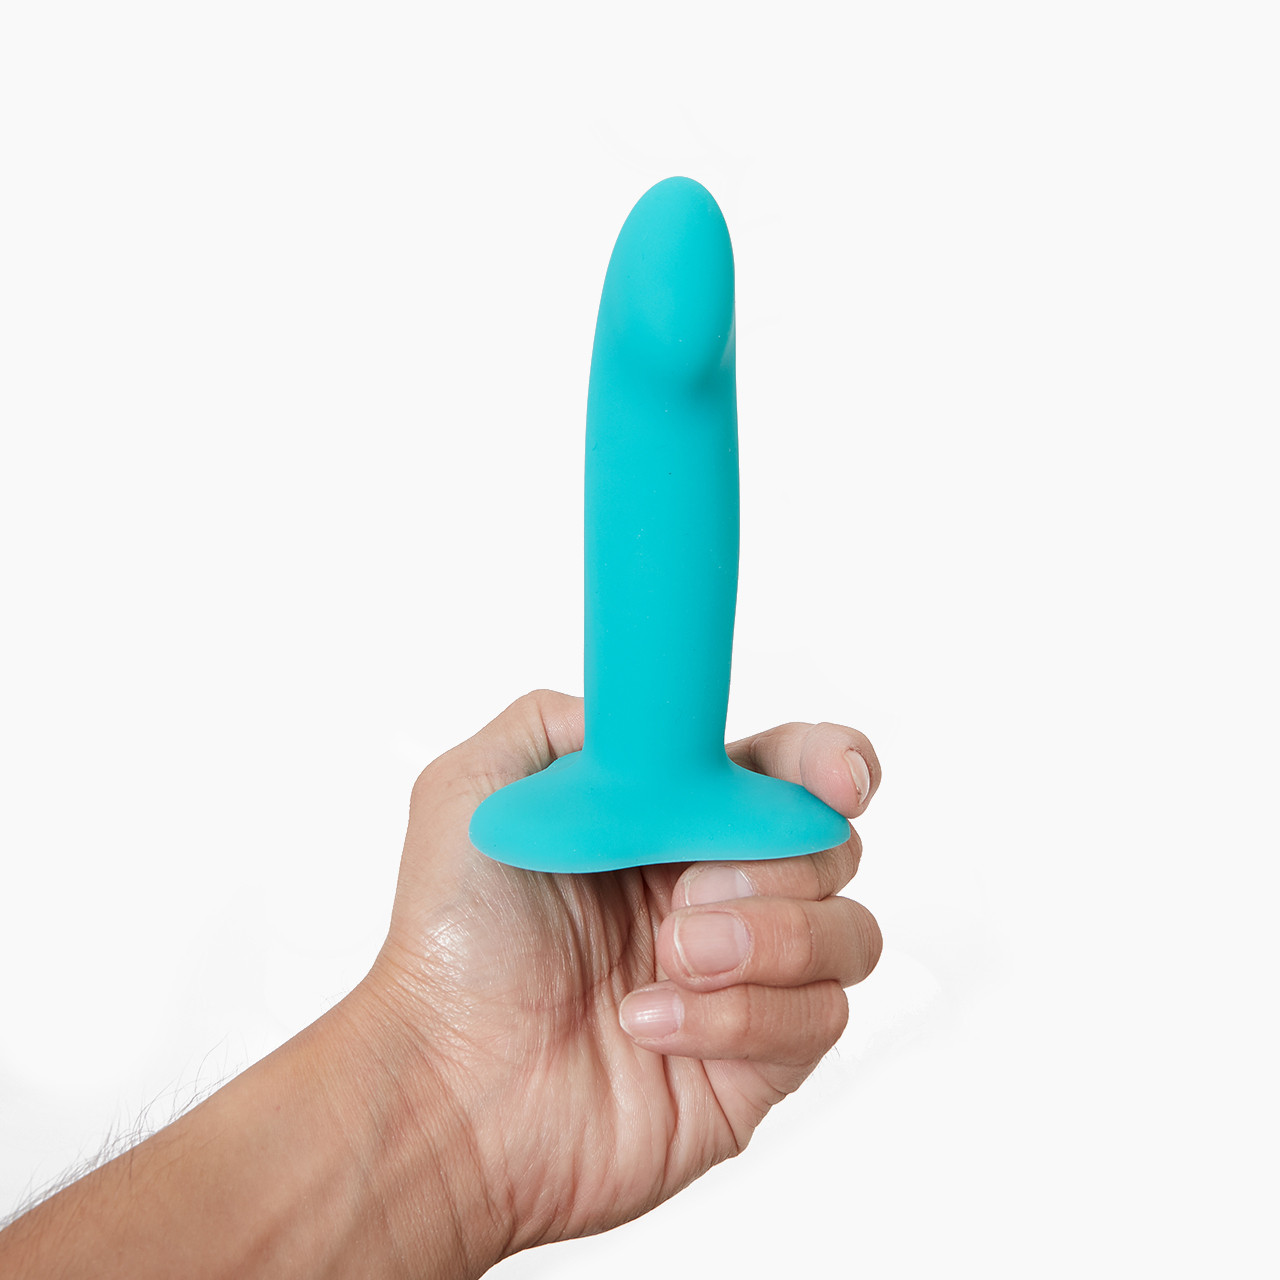 A hand displaying 'Fun Factory Limba Flex Small', a silicone dildo with a suction base